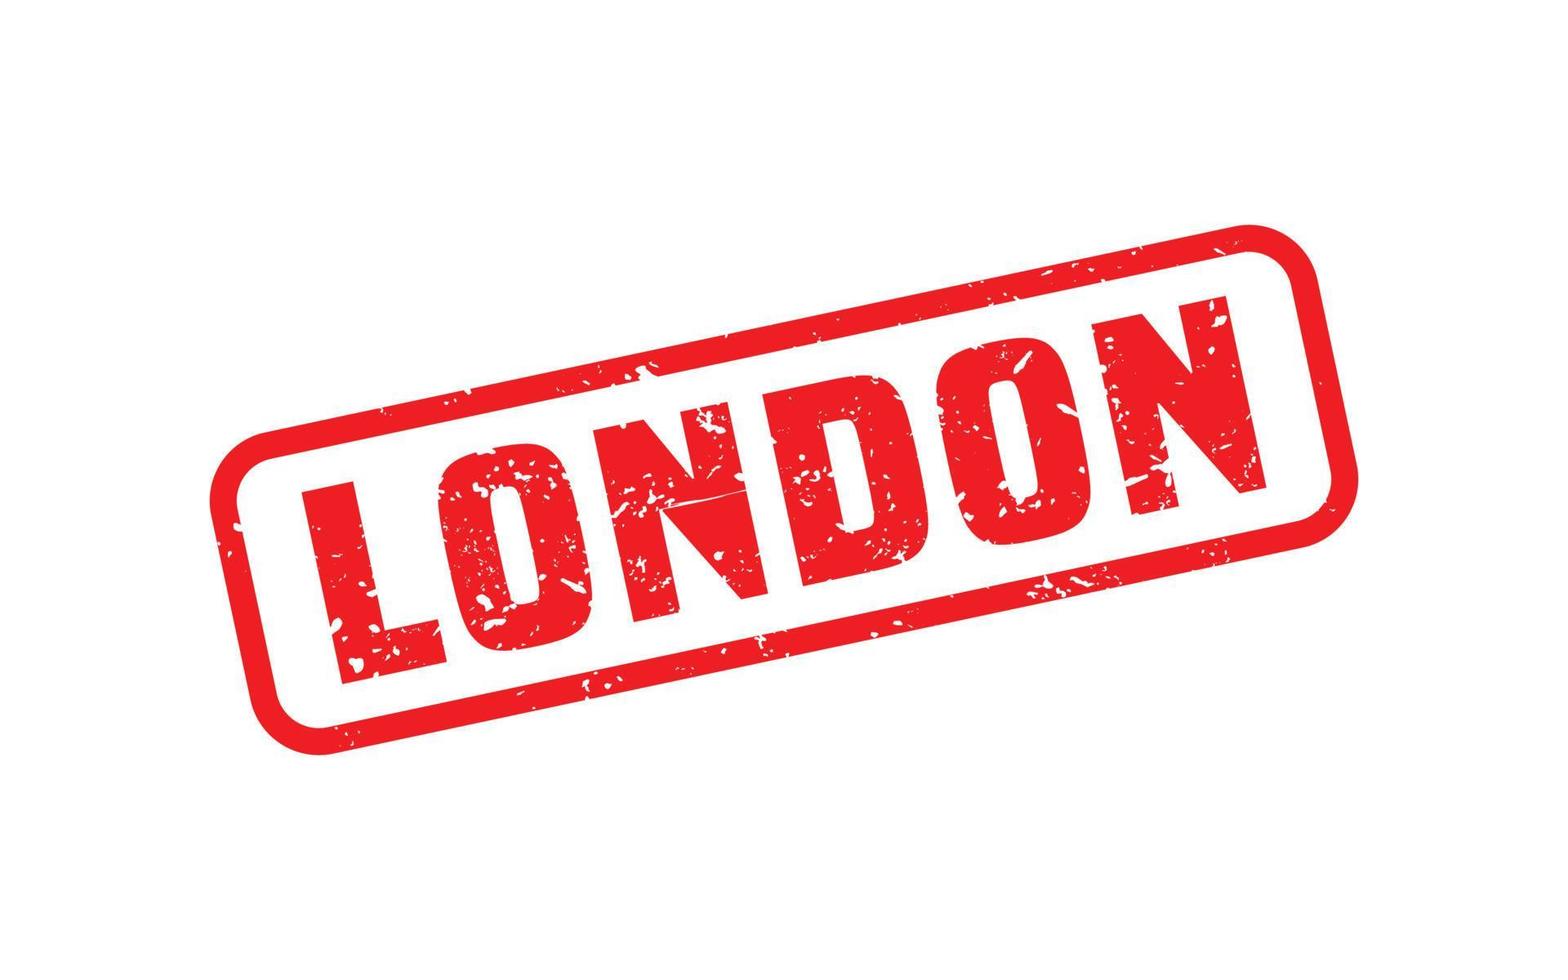 LONDON rubber stamp texture with grunge style on white background vector